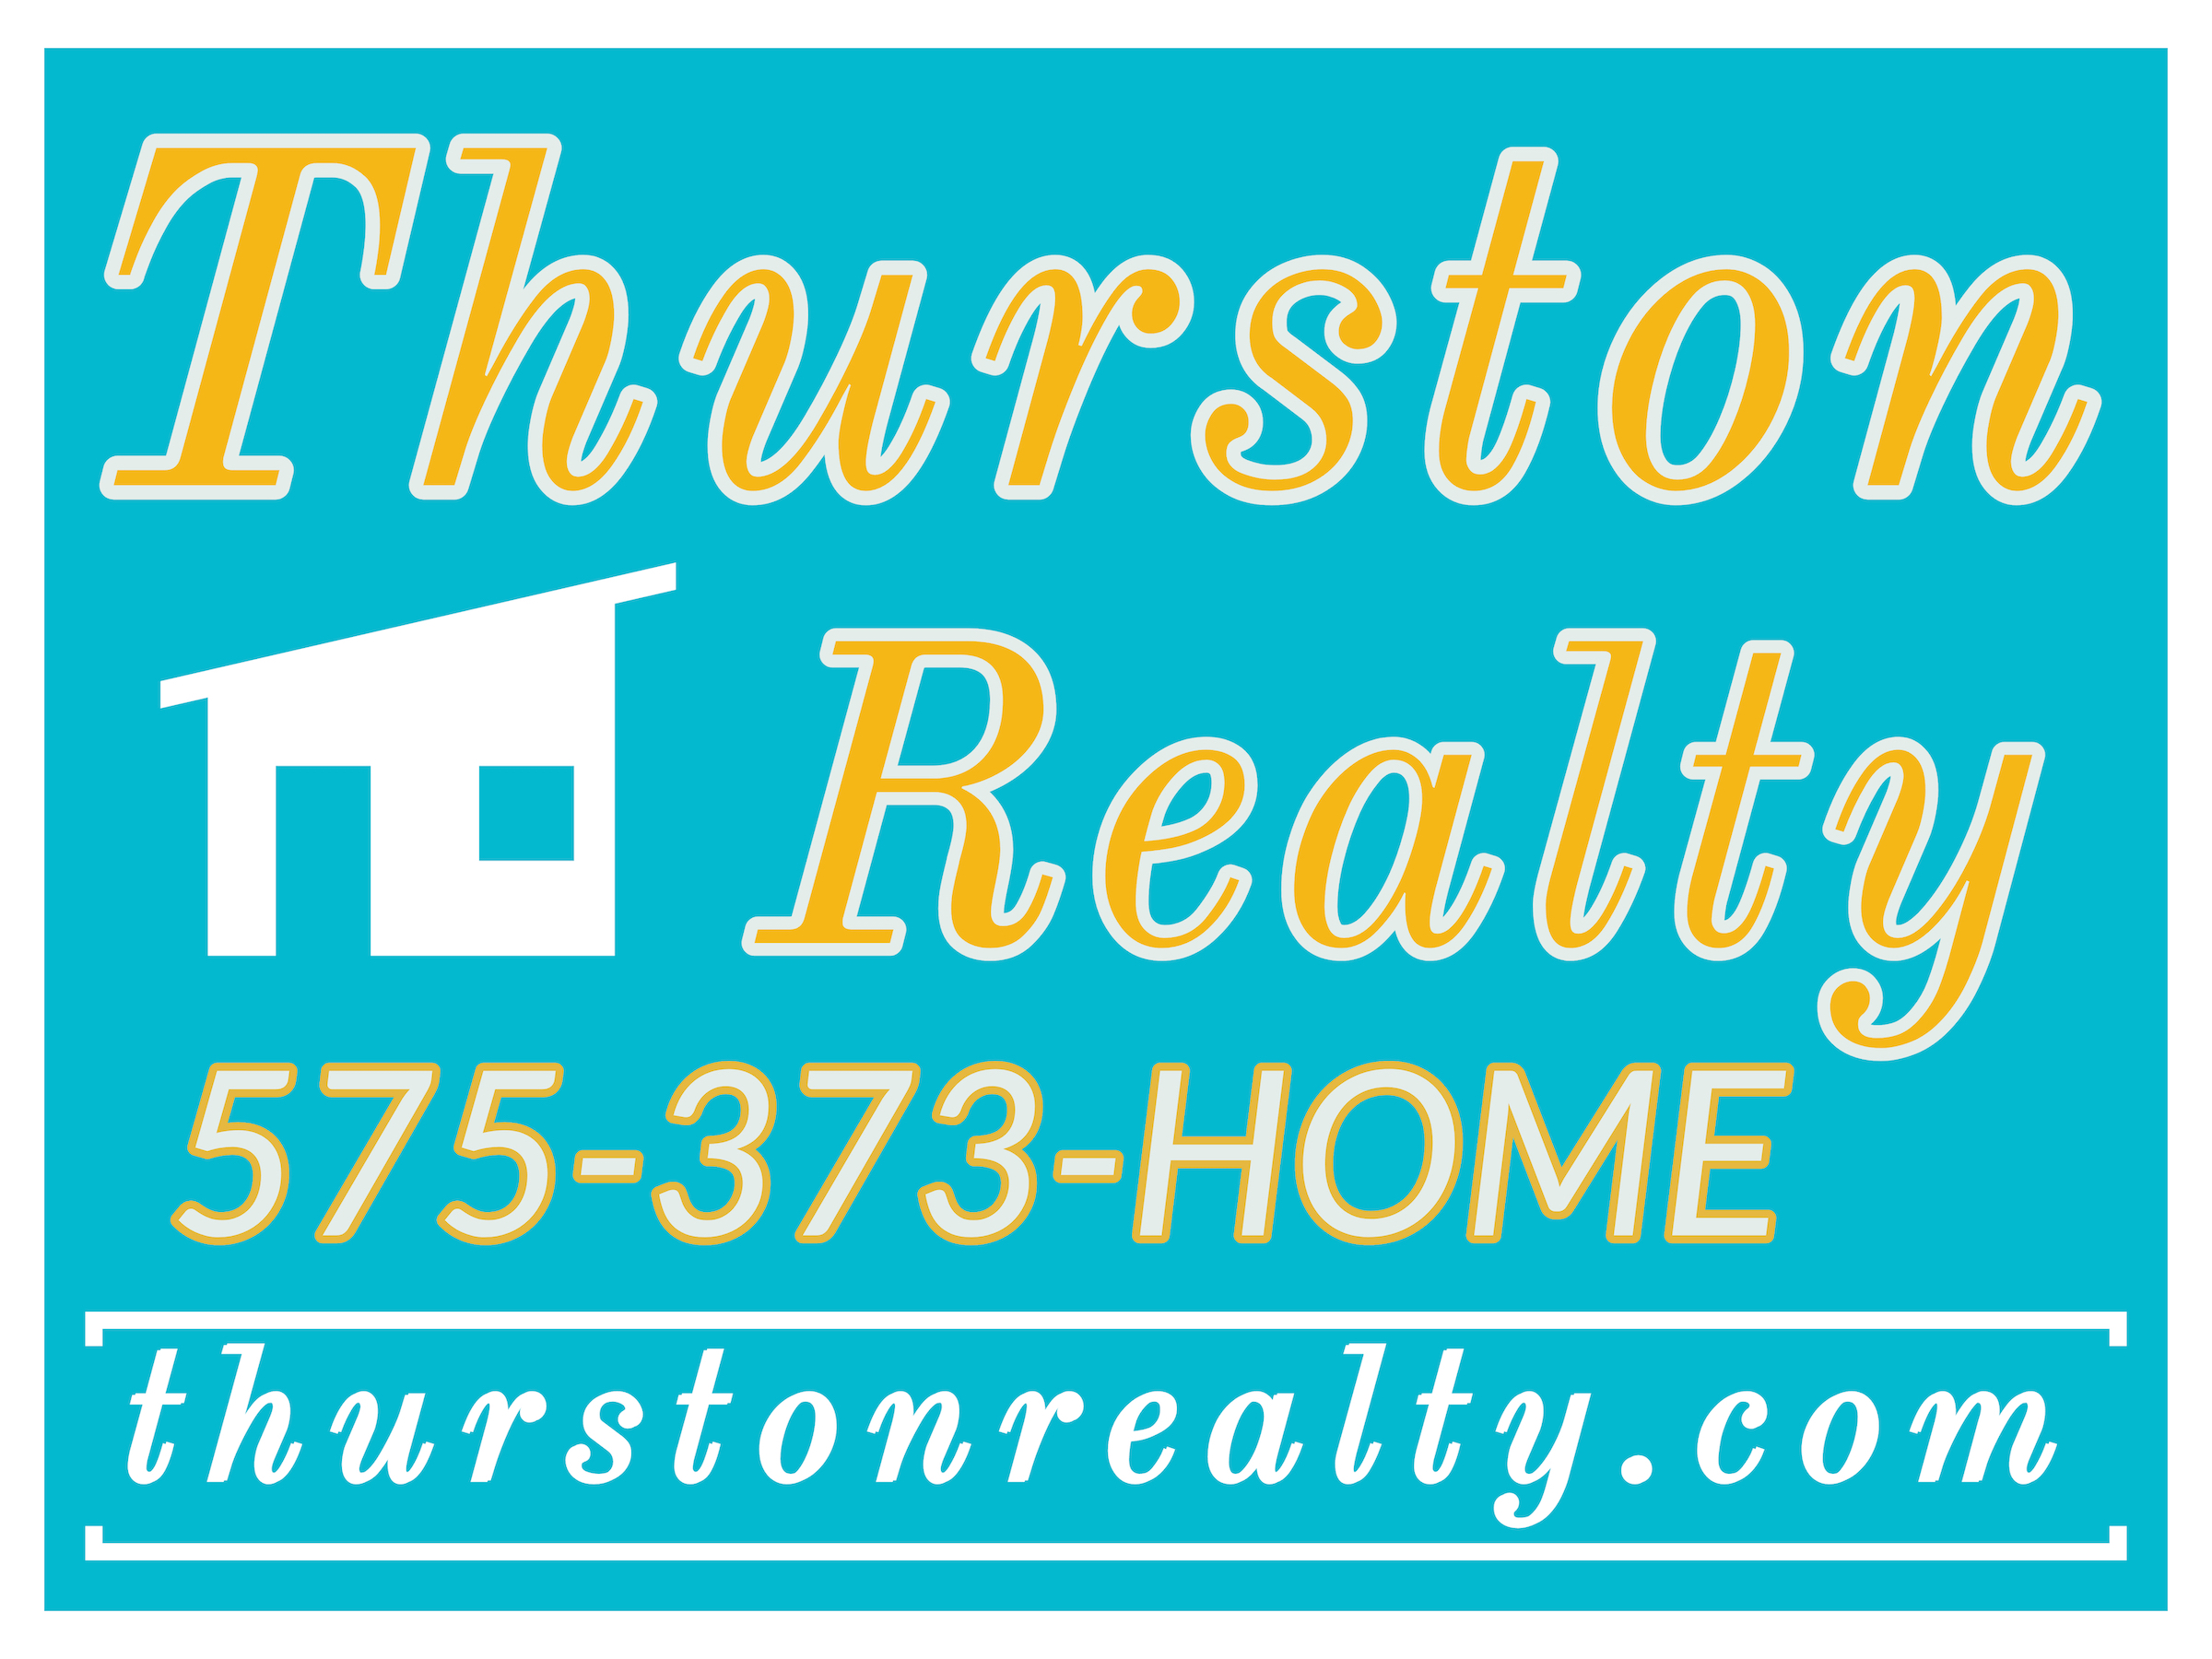 Thurston Realty - Buy, Sell, Trade, Rent